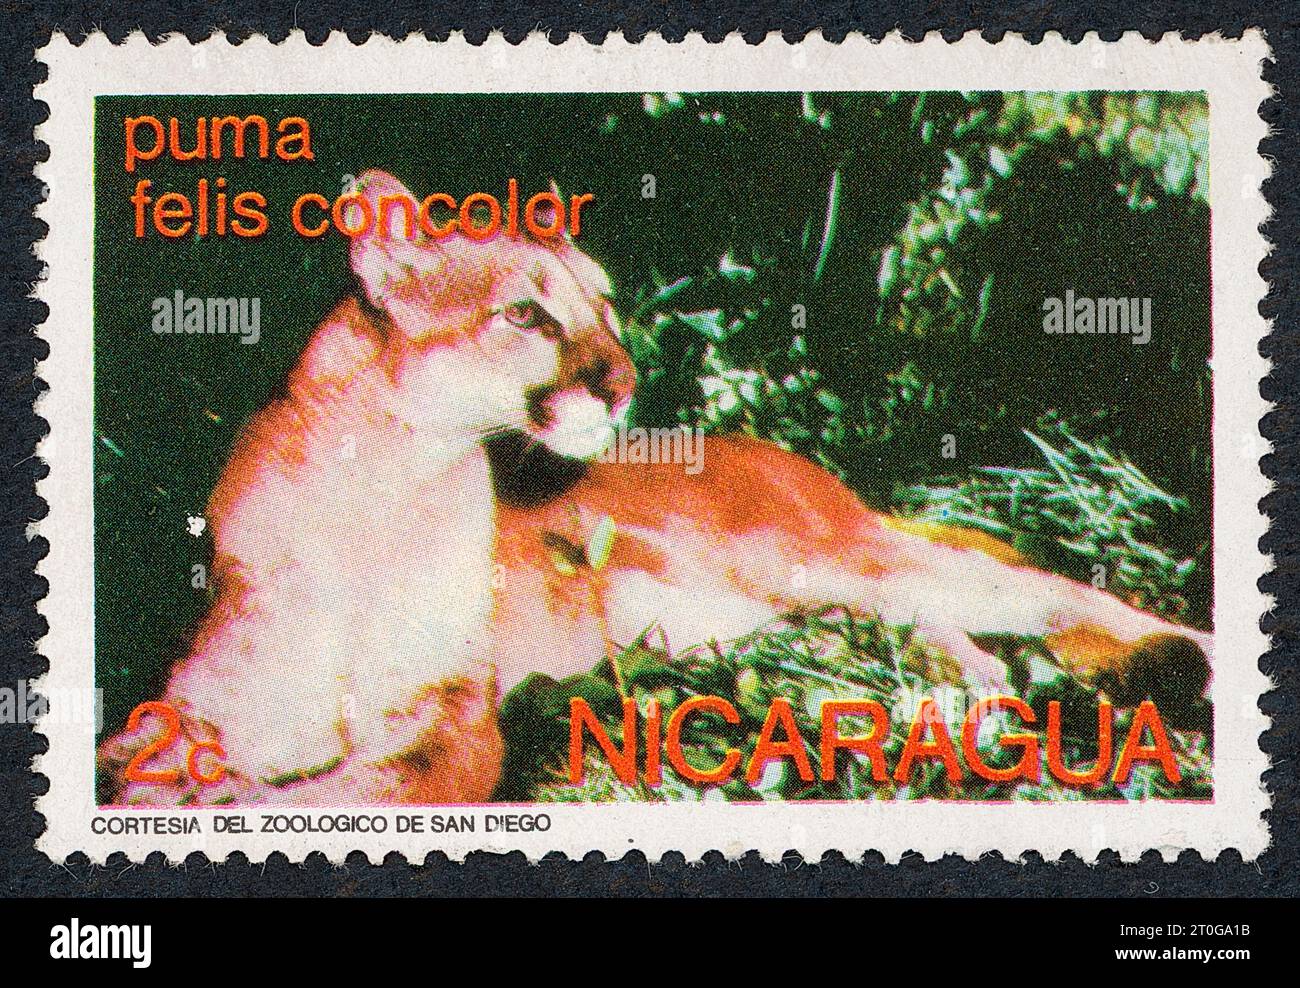 Cougar (Felis concolor). Postage stamp issued in Nicaragua in 1974. Stock Photo